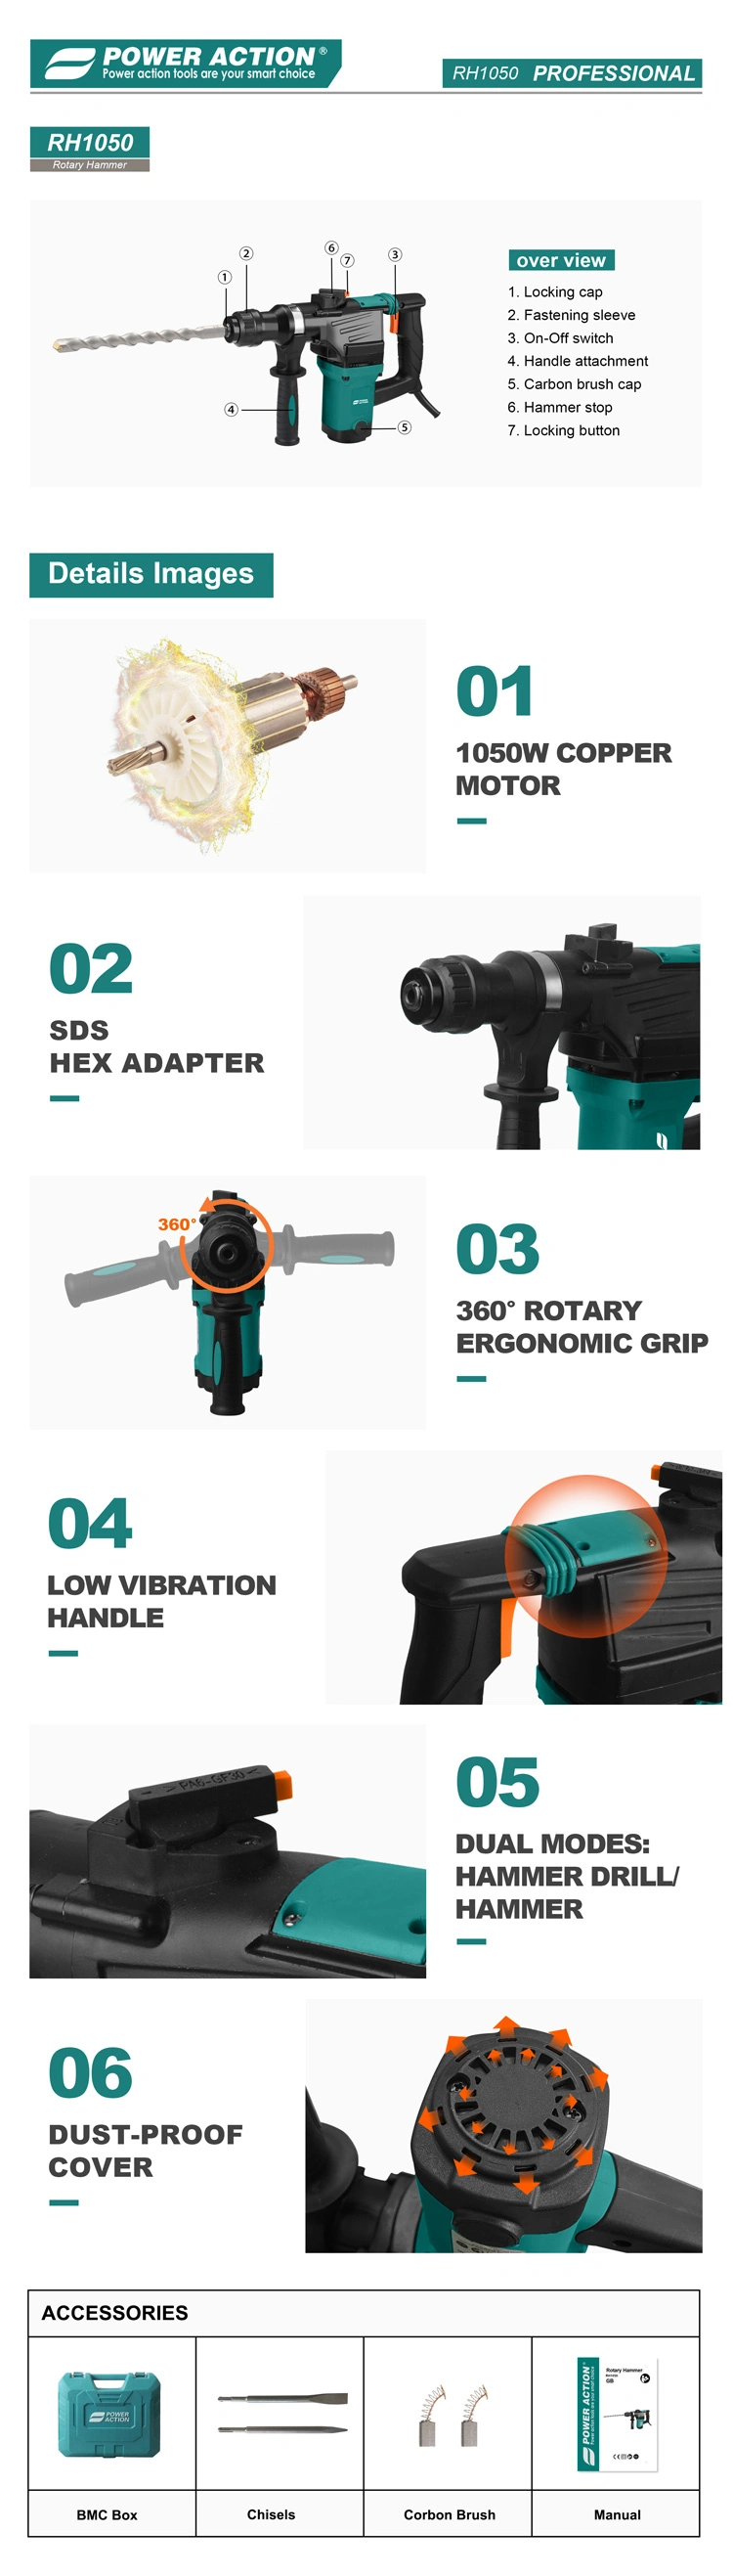 Power Action Electric Heavy Duty Concrete Rotary Hammer